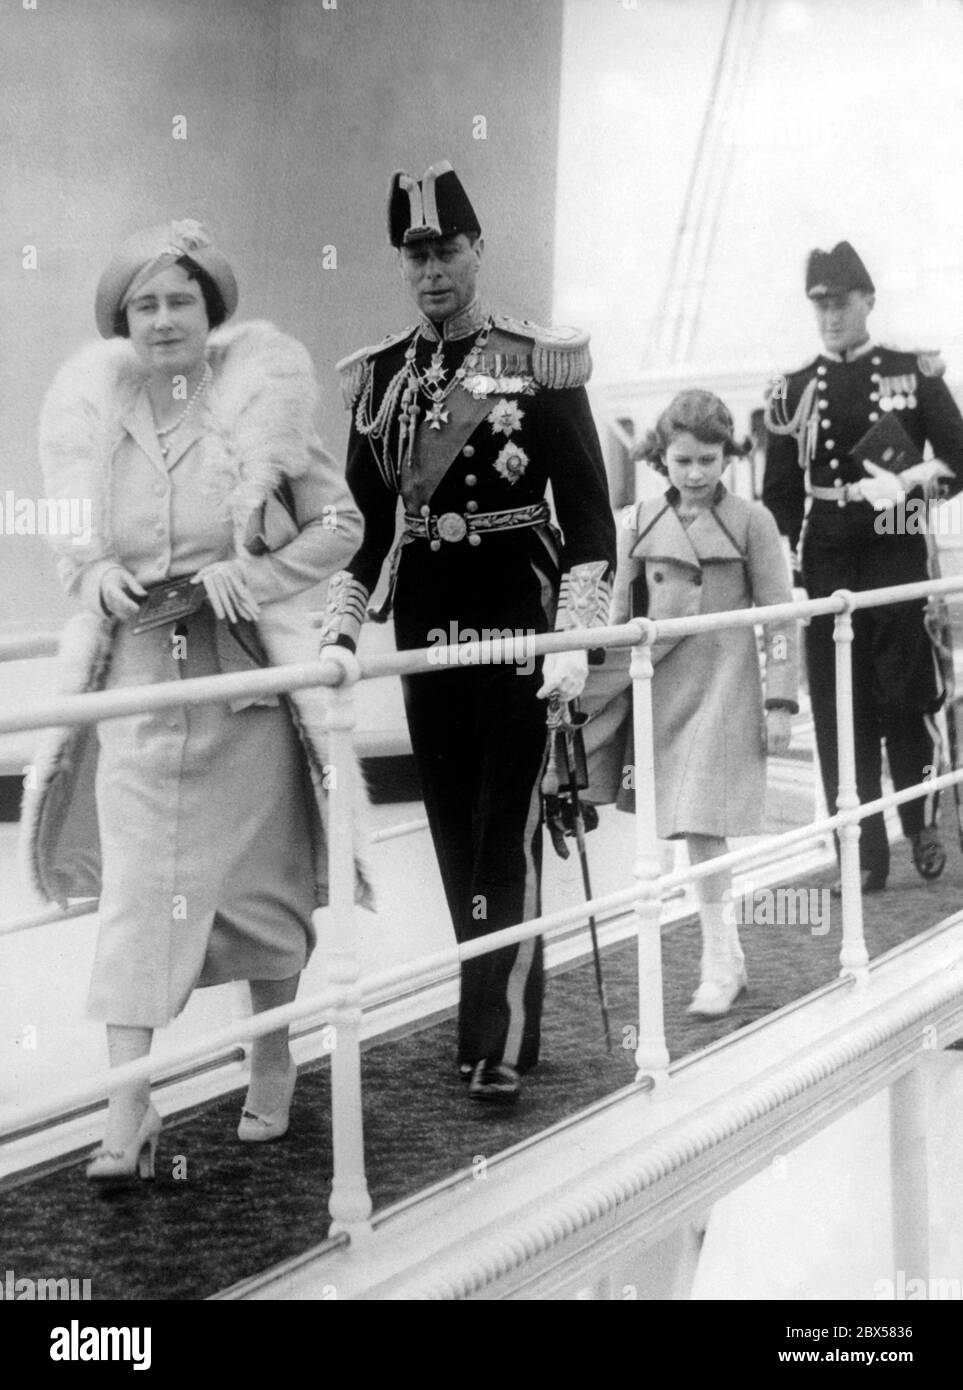 From left to right: Queen Elizabeth, King George VI: and Crown Princess Elizabeth II on board the royal yacht 'Victoria and Albert' during the Coronation Review of the British and Merchant Navy at Spithead. More than 300 ships took part in the Fleet Parade, 17 of them were foreign warships. Stock Photo